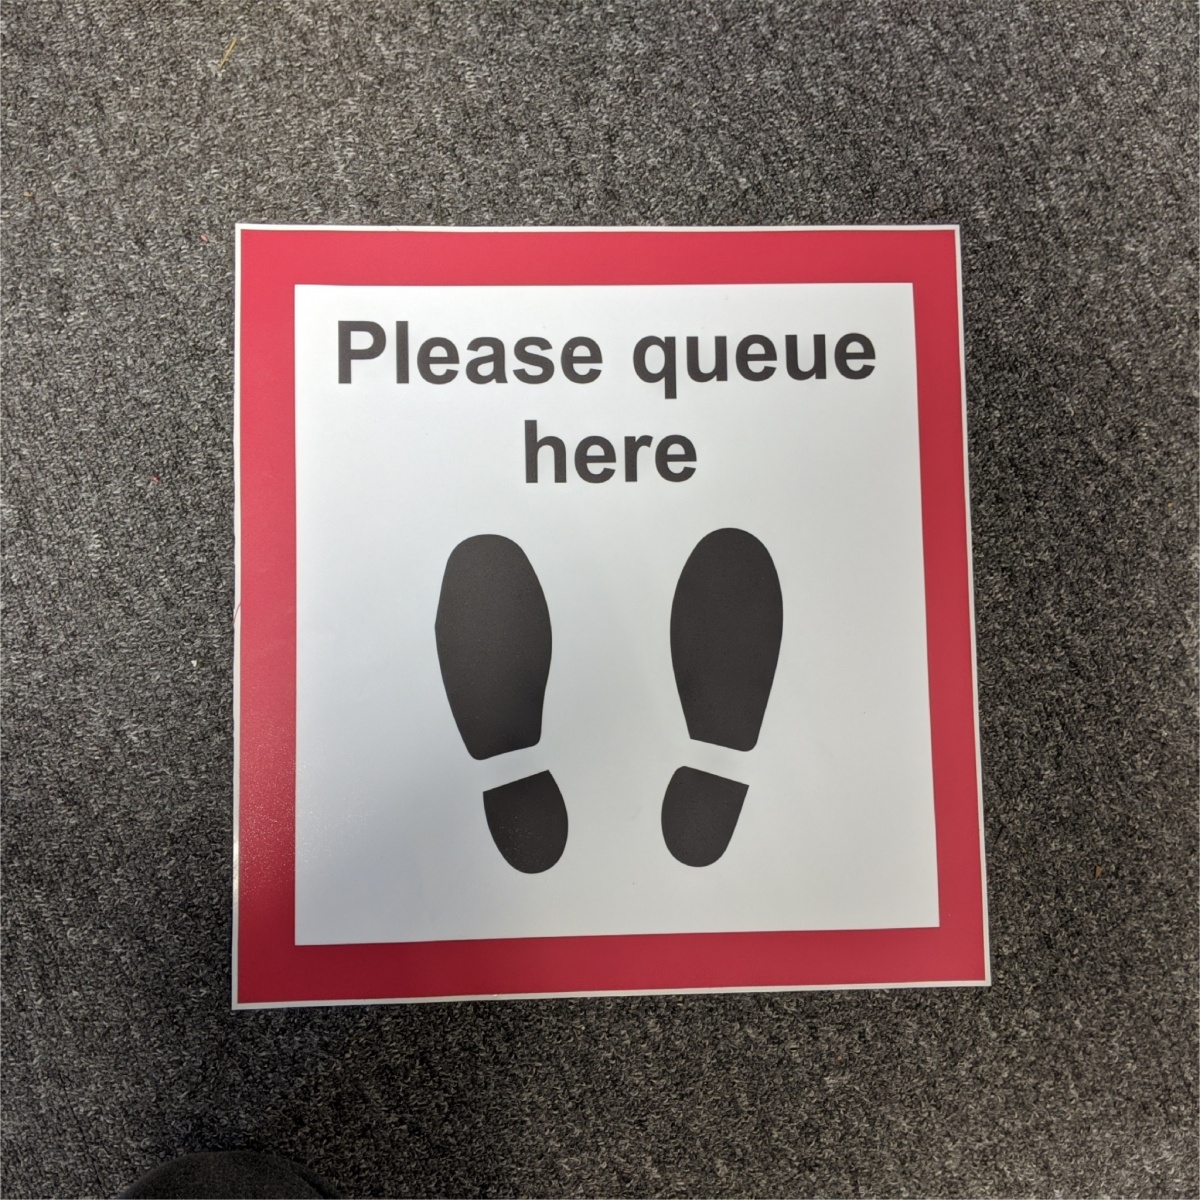 a square floor sticker informing customers where to stand when waiting